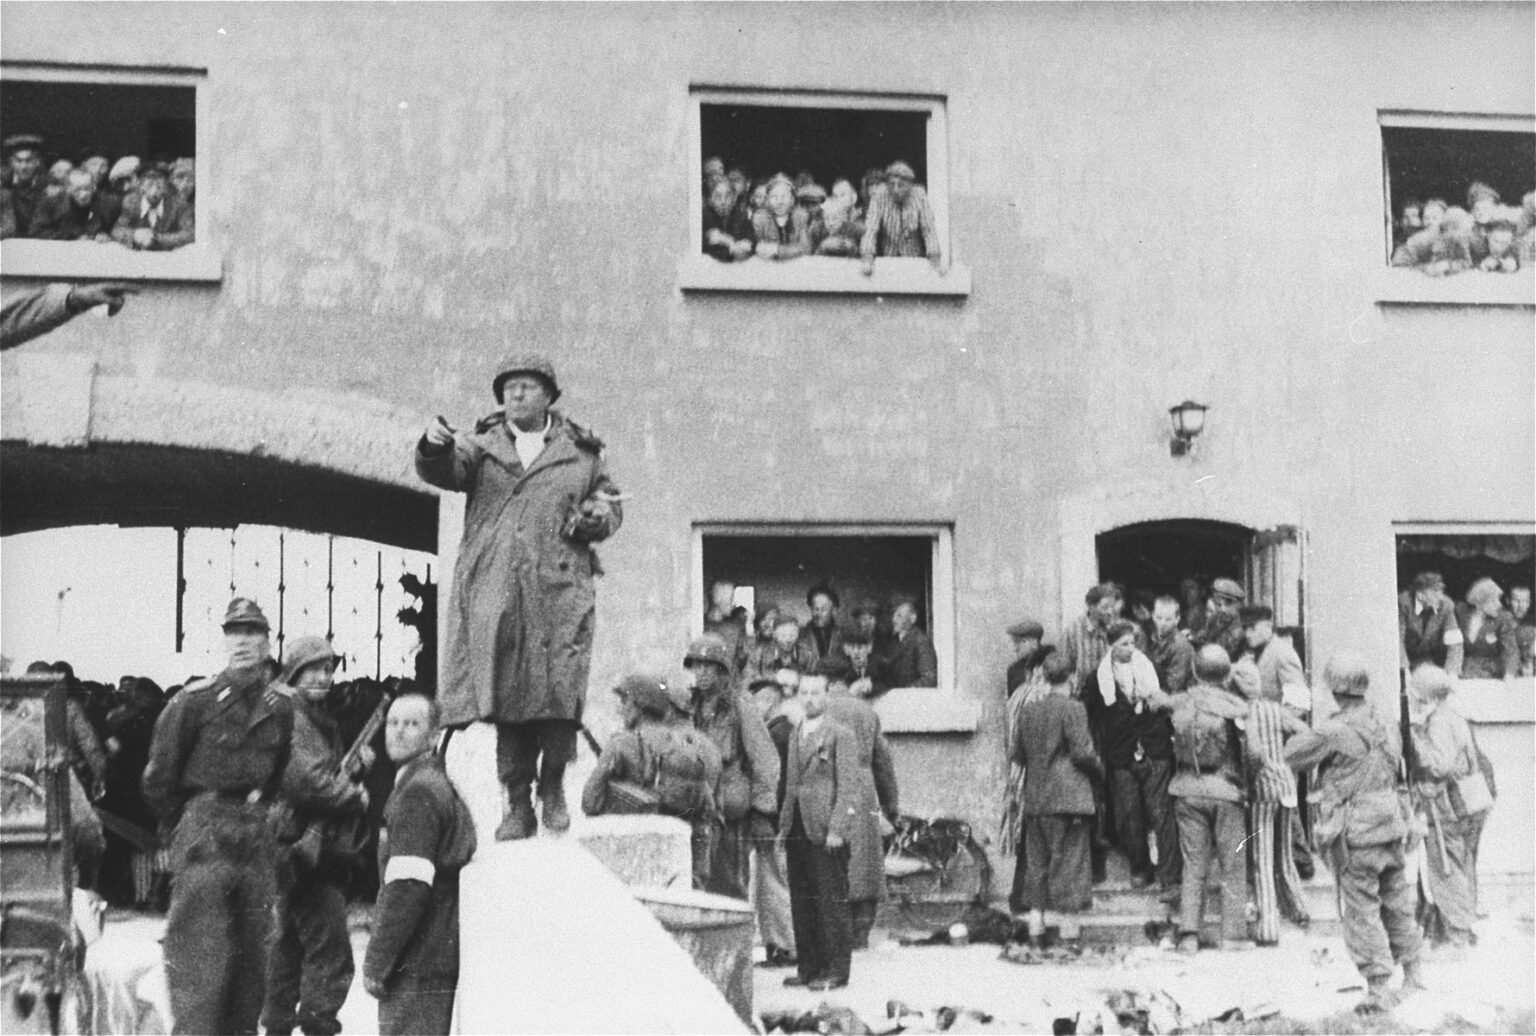 Pics US troops liberated Dachau concentration camp 76 years ago